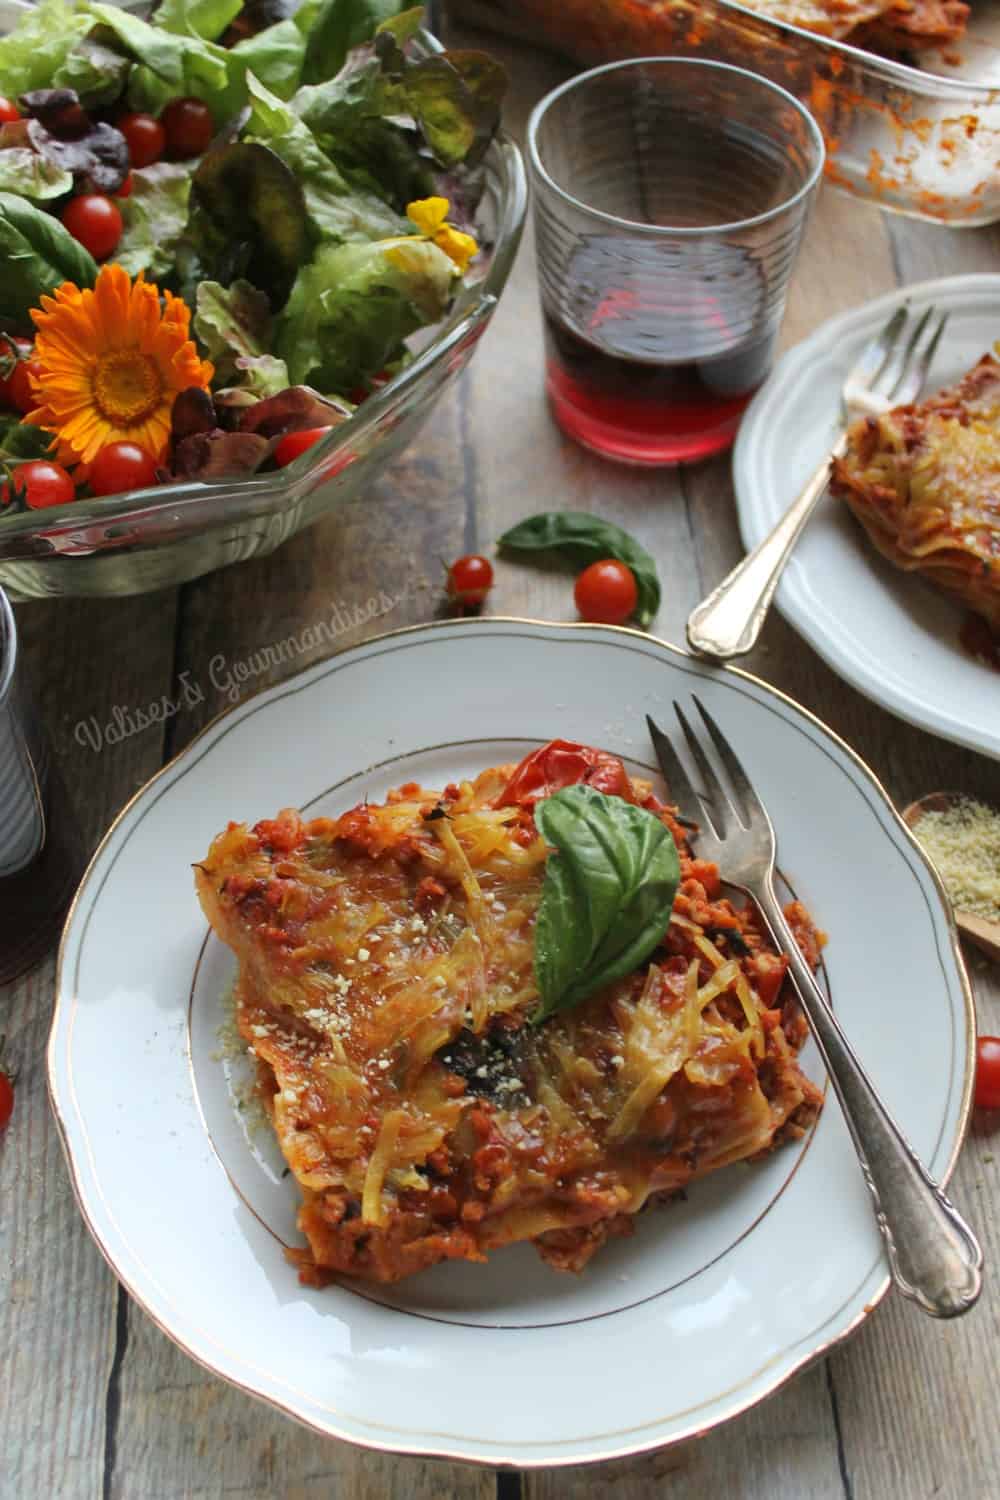 This vegan lasagna made with TSP is so close to the traditional recipe!